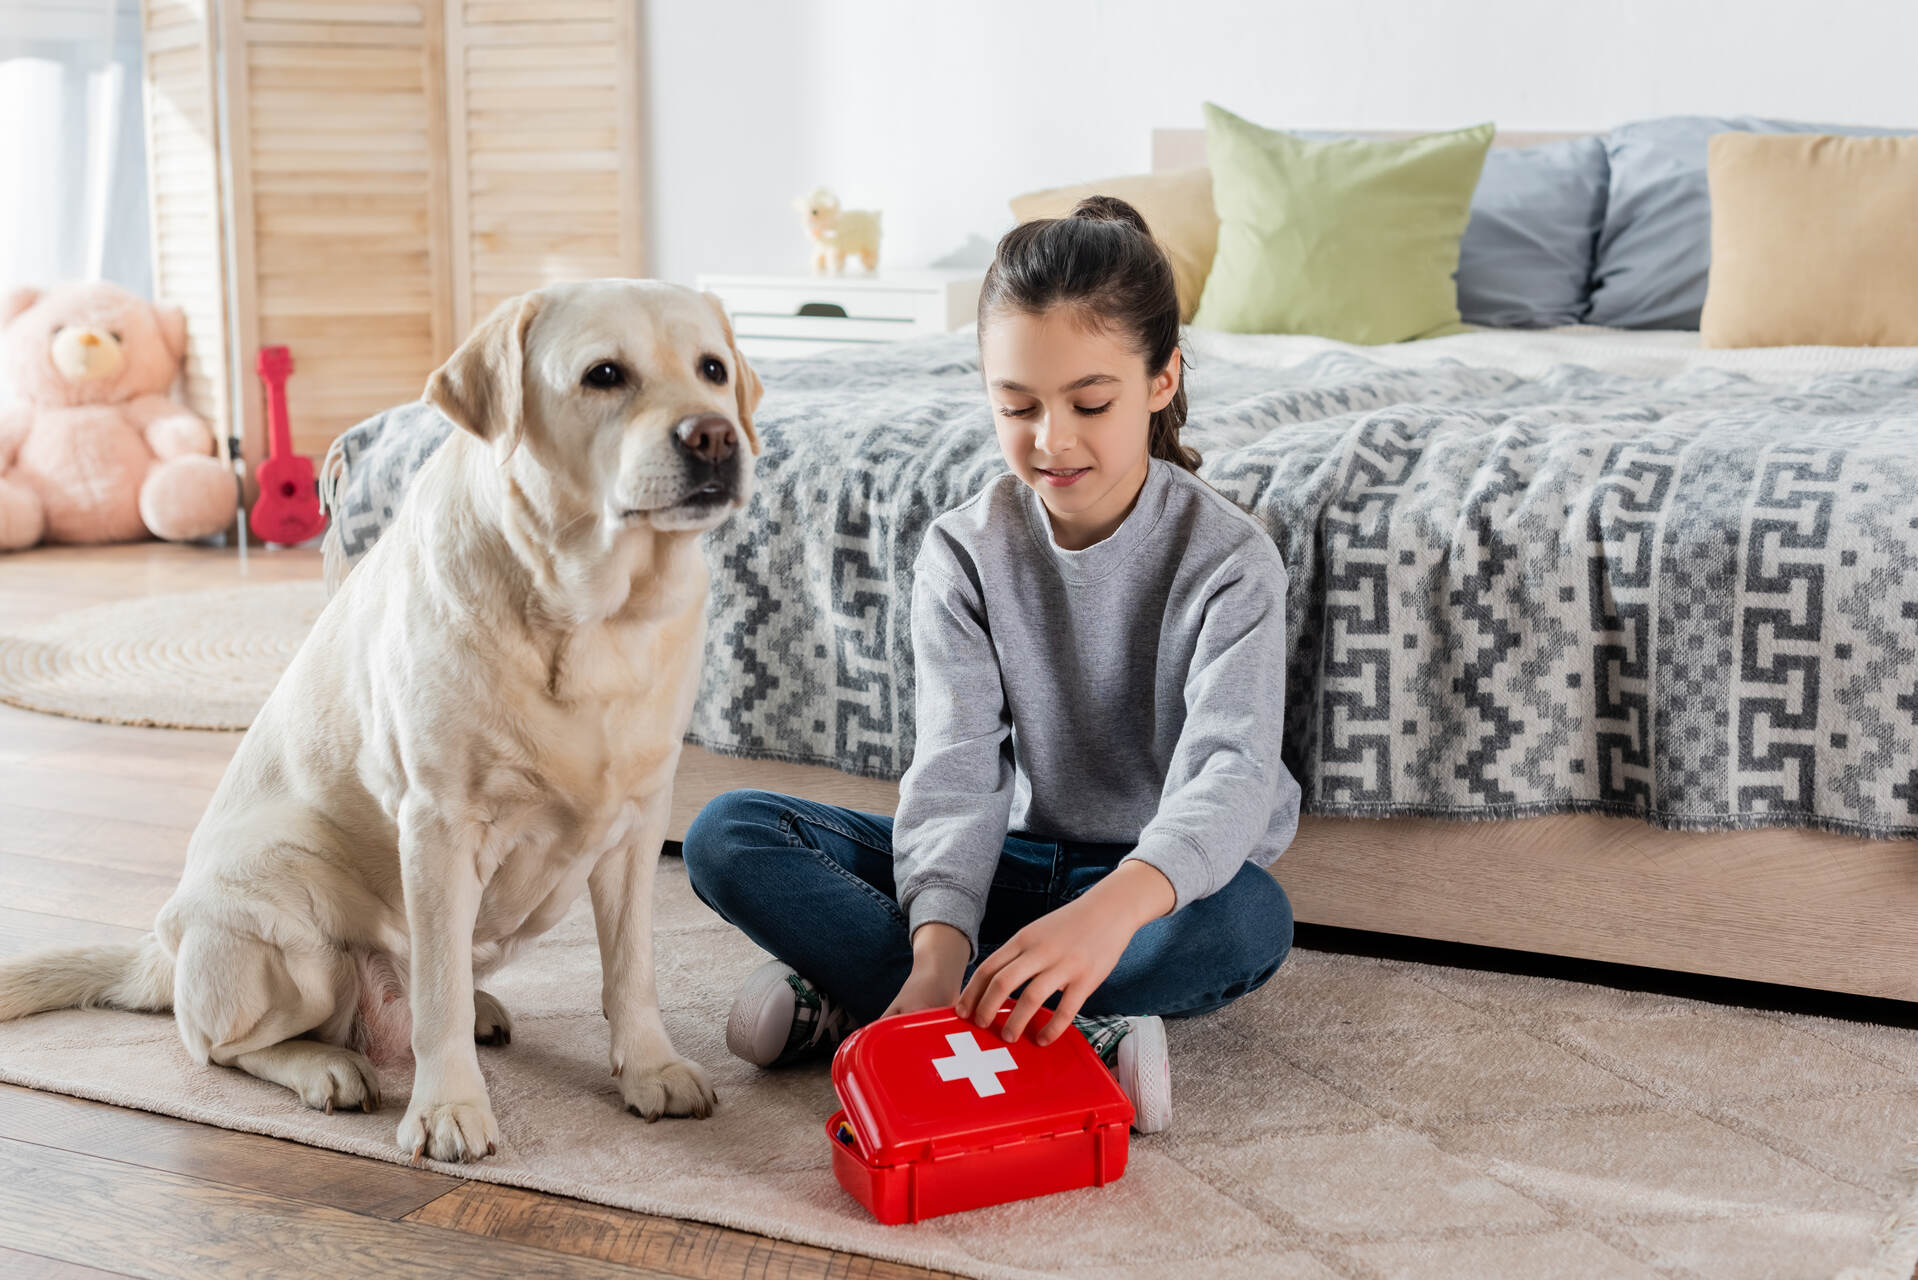 A young girl preparing a dog first aid kit at home